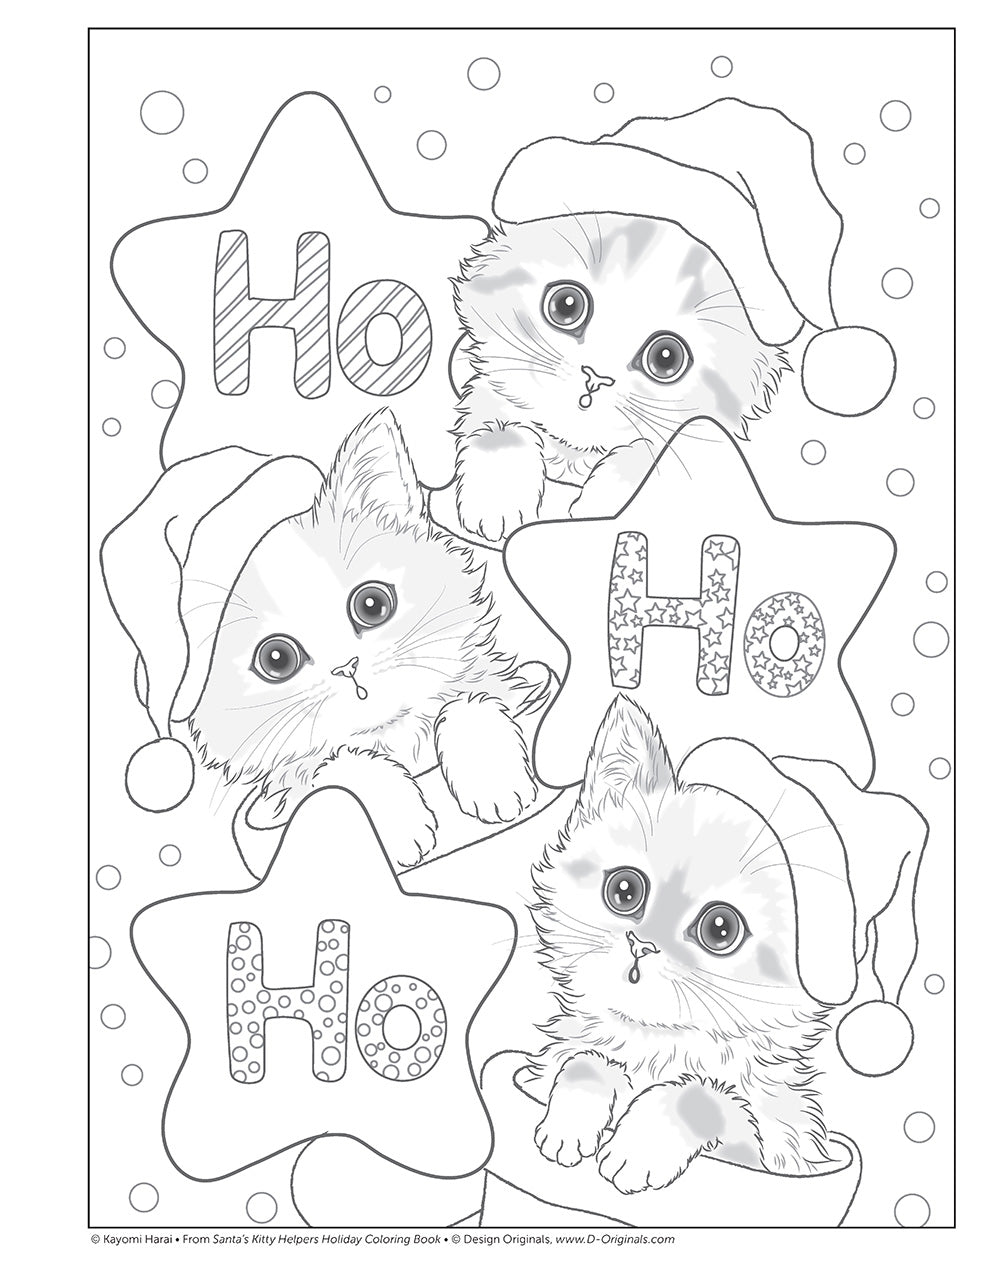 Santa's Kitty Helpers Holiday Coloring Book